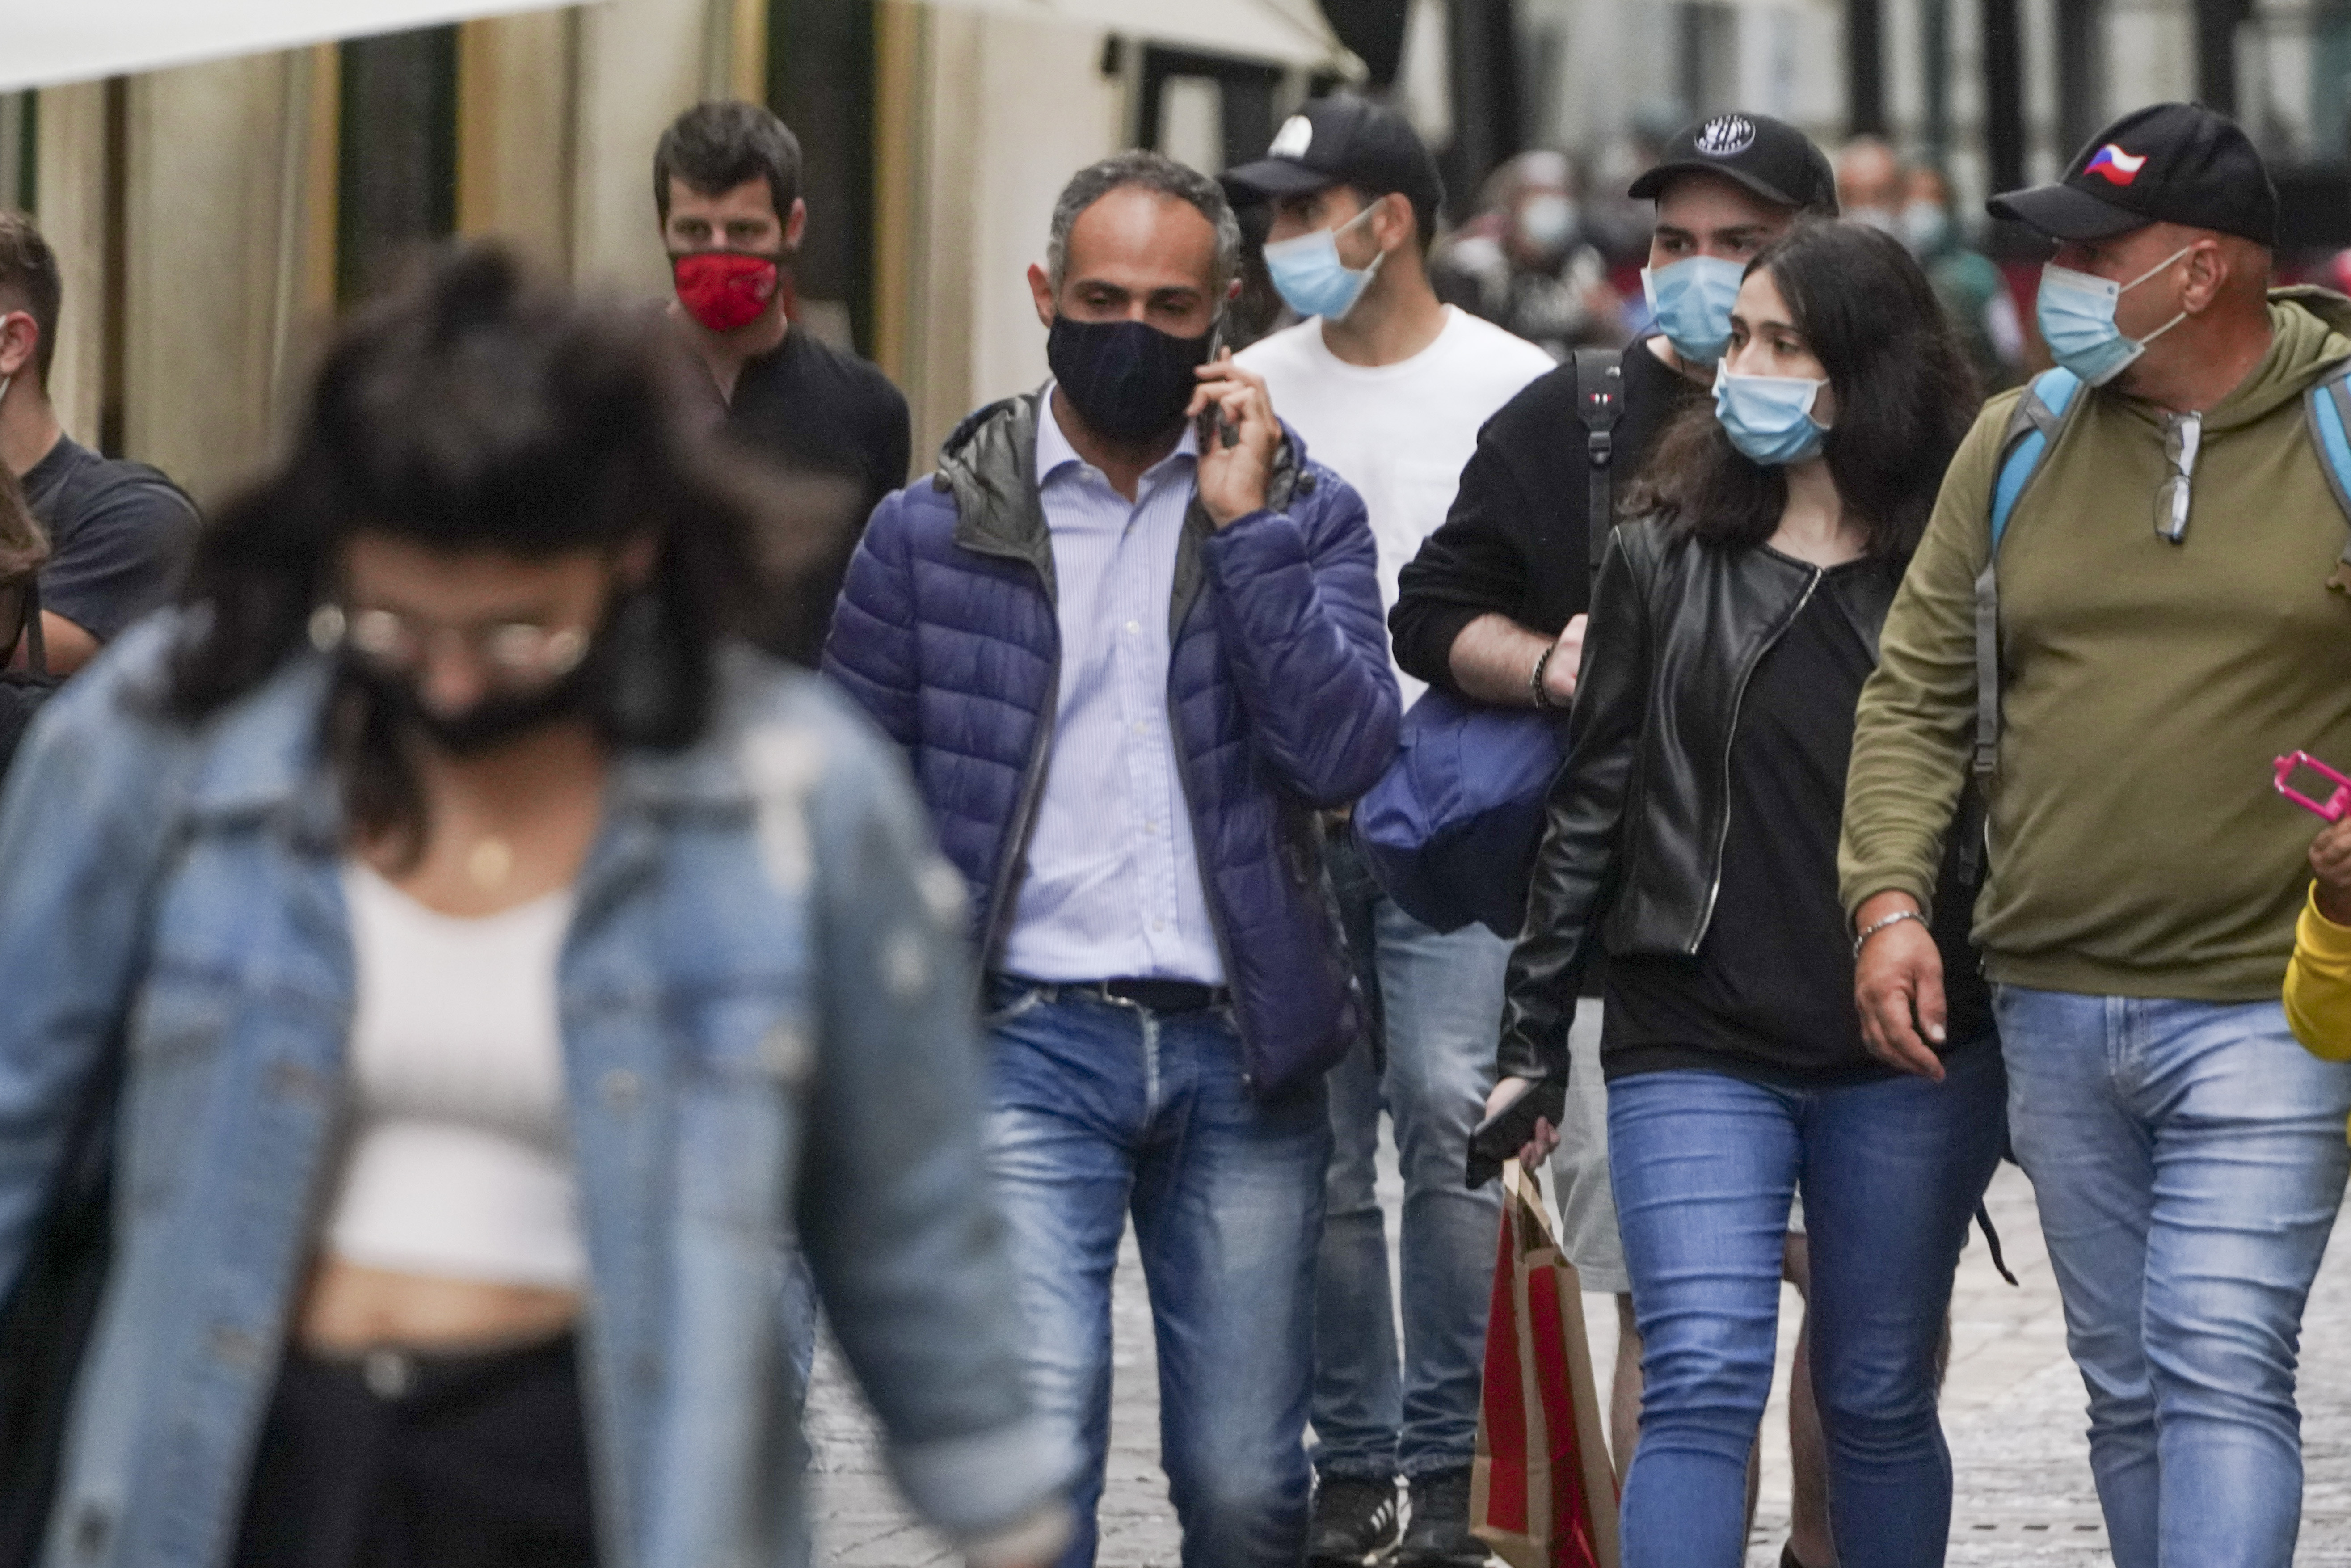 People wear face masks to prevent the spread of COVID-19 as they stroll in downtown Rome, Saturday, Oct. 3, 2020. As of Saturday it is mandatory to wear masks outdoors in Lazio, the region that includes Rome. (AP Photo/Andrew Medichini)